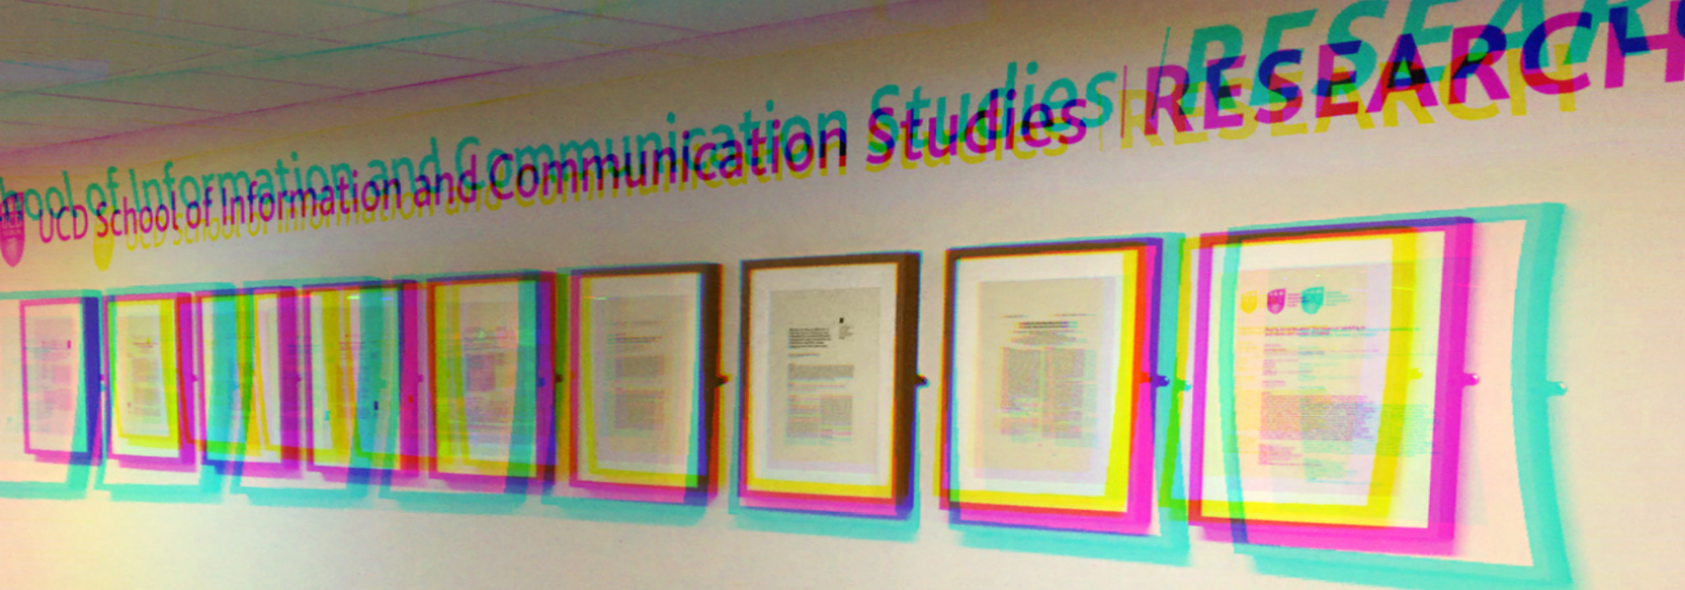 research-wall inside banner-1685x590